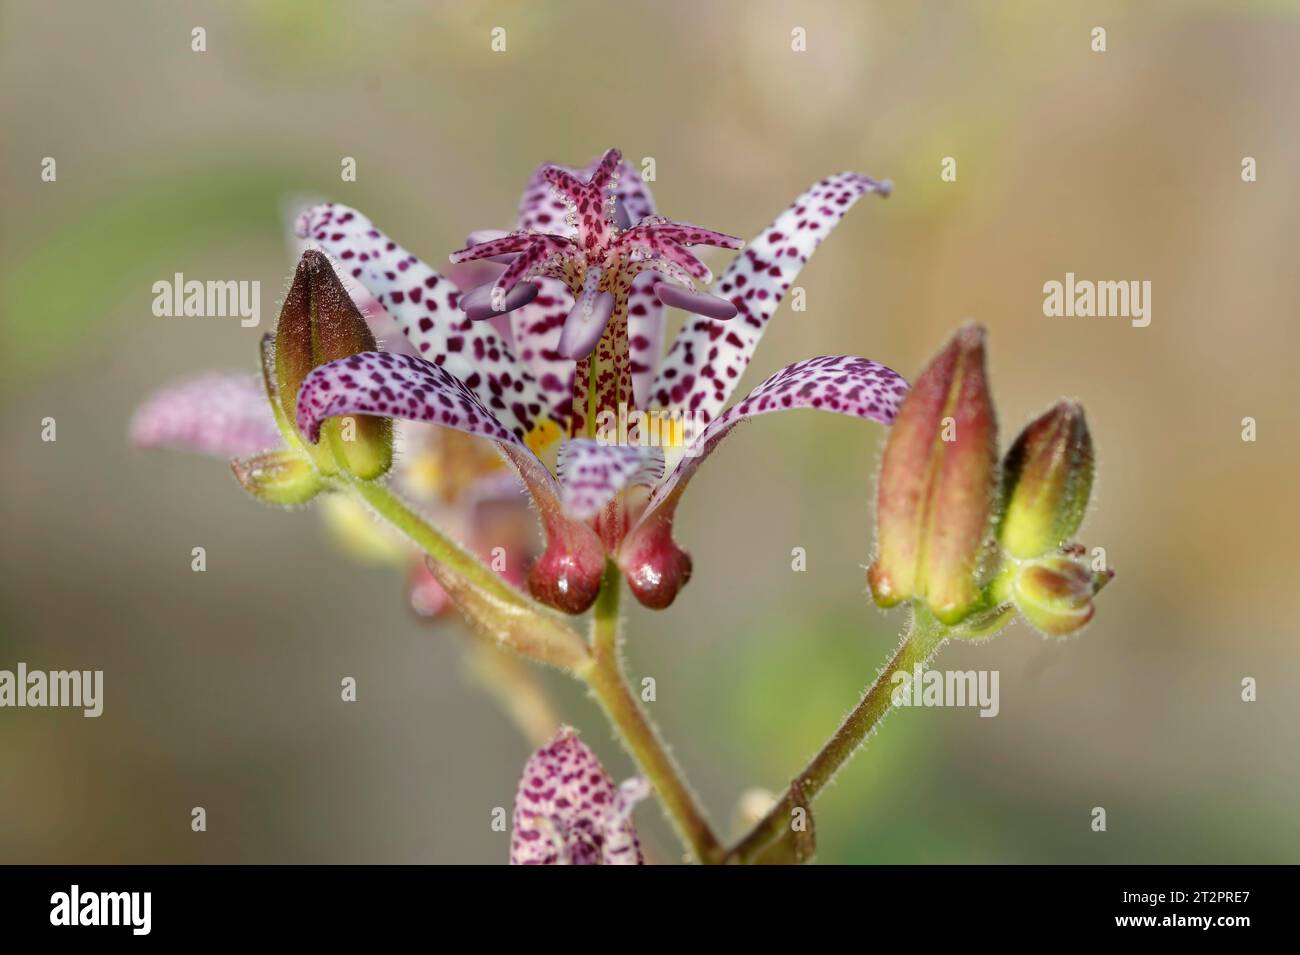 Natural closeup on the colorful Japanese toad or hairy toad lily, Tricyrtis hirta in the garden Stock Photo